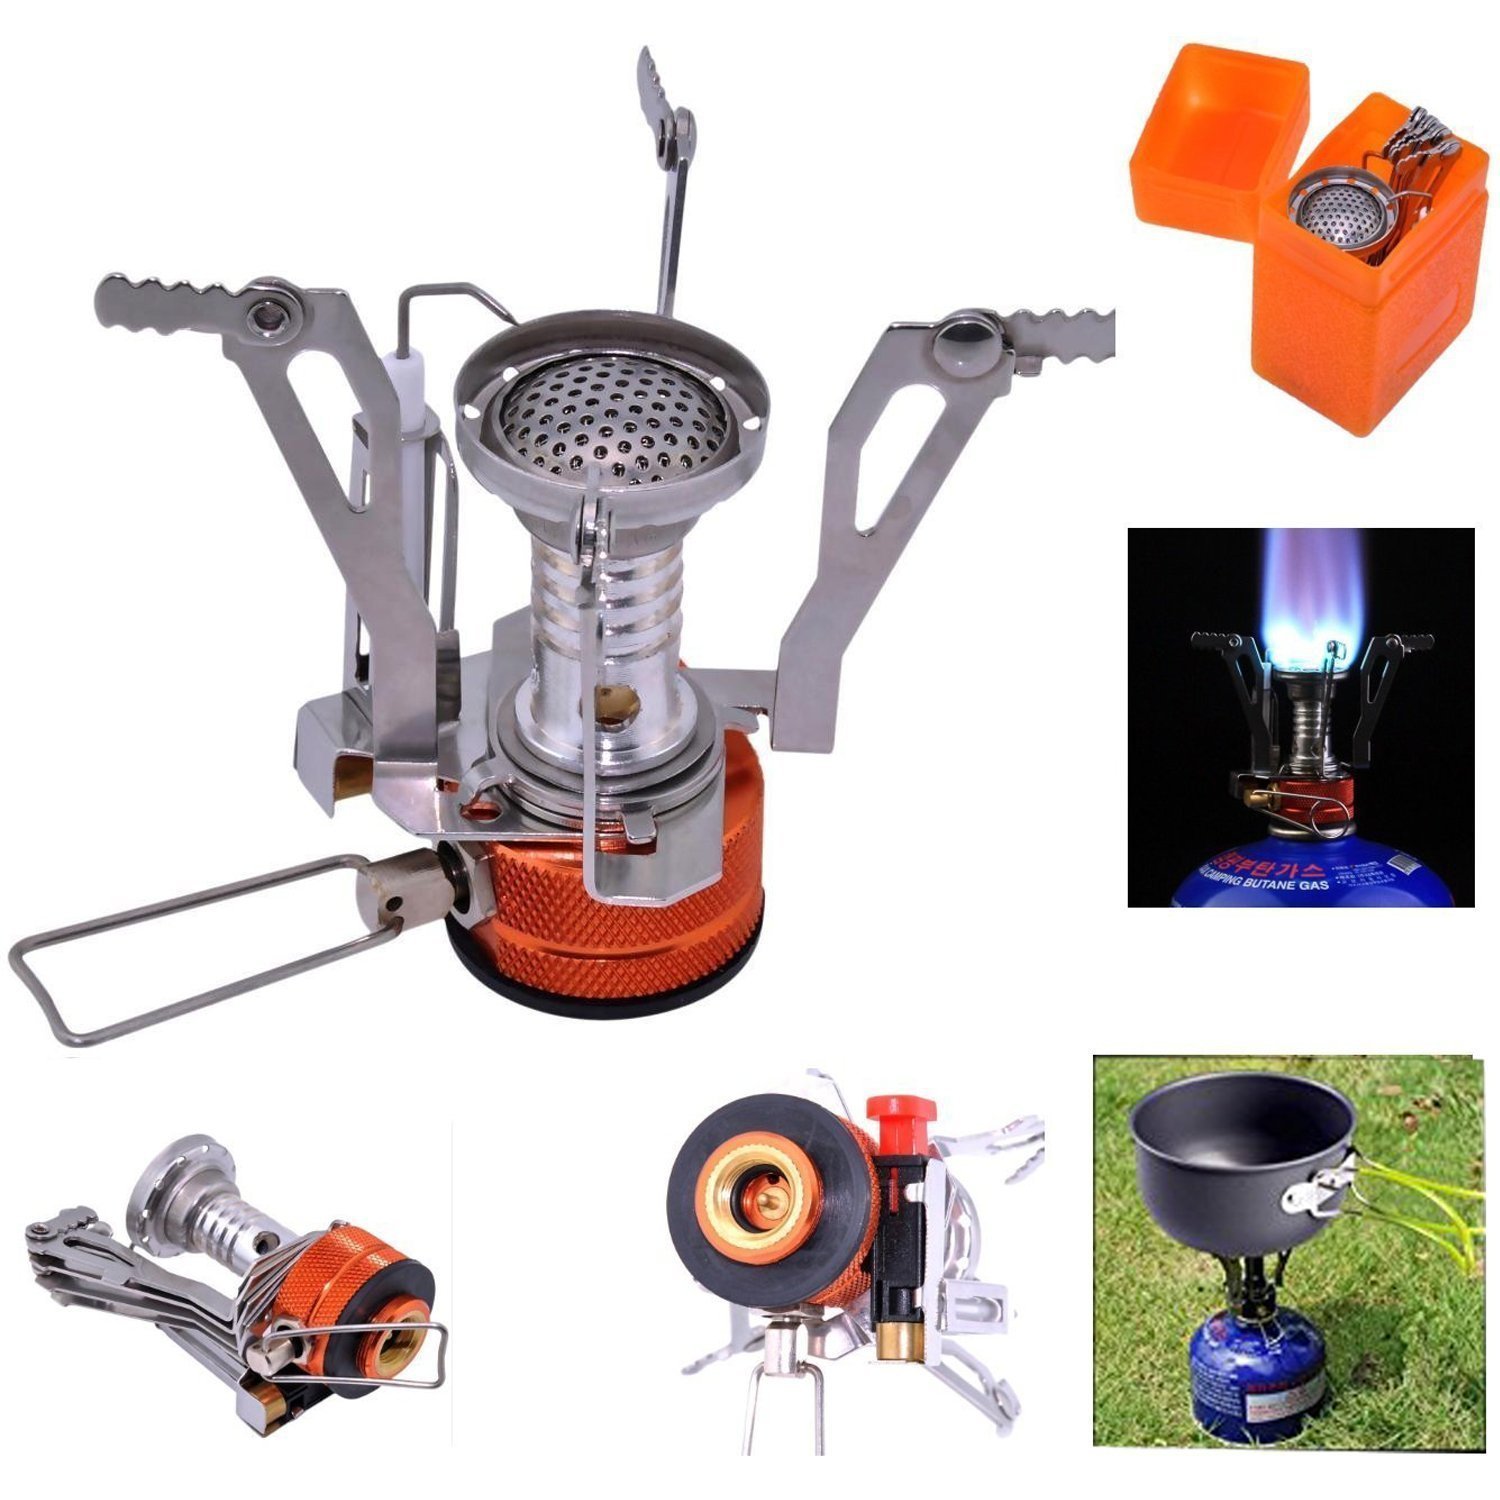 GL Portable Light Outdoor Camping Cookware Sets Gas Stove with Foldable Tableware Pan Dishwashing Sponge Hiking Picnic Tool 25